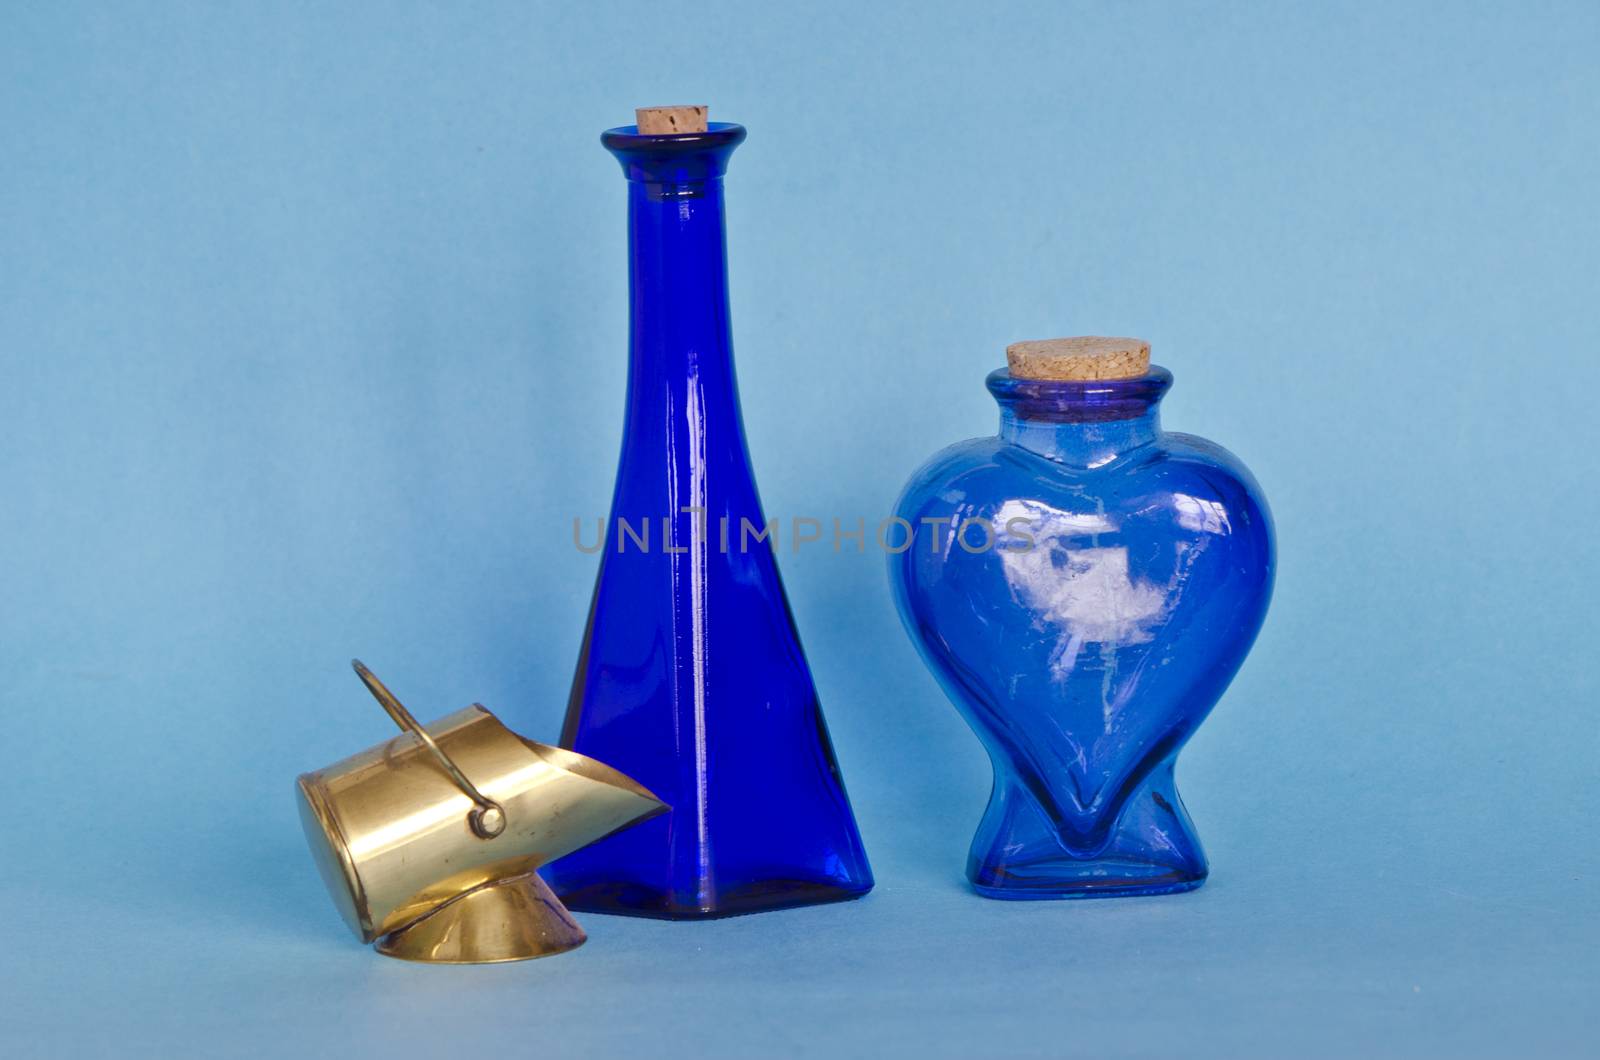 Two blue glass bottles with decorative brass object by alis_photo